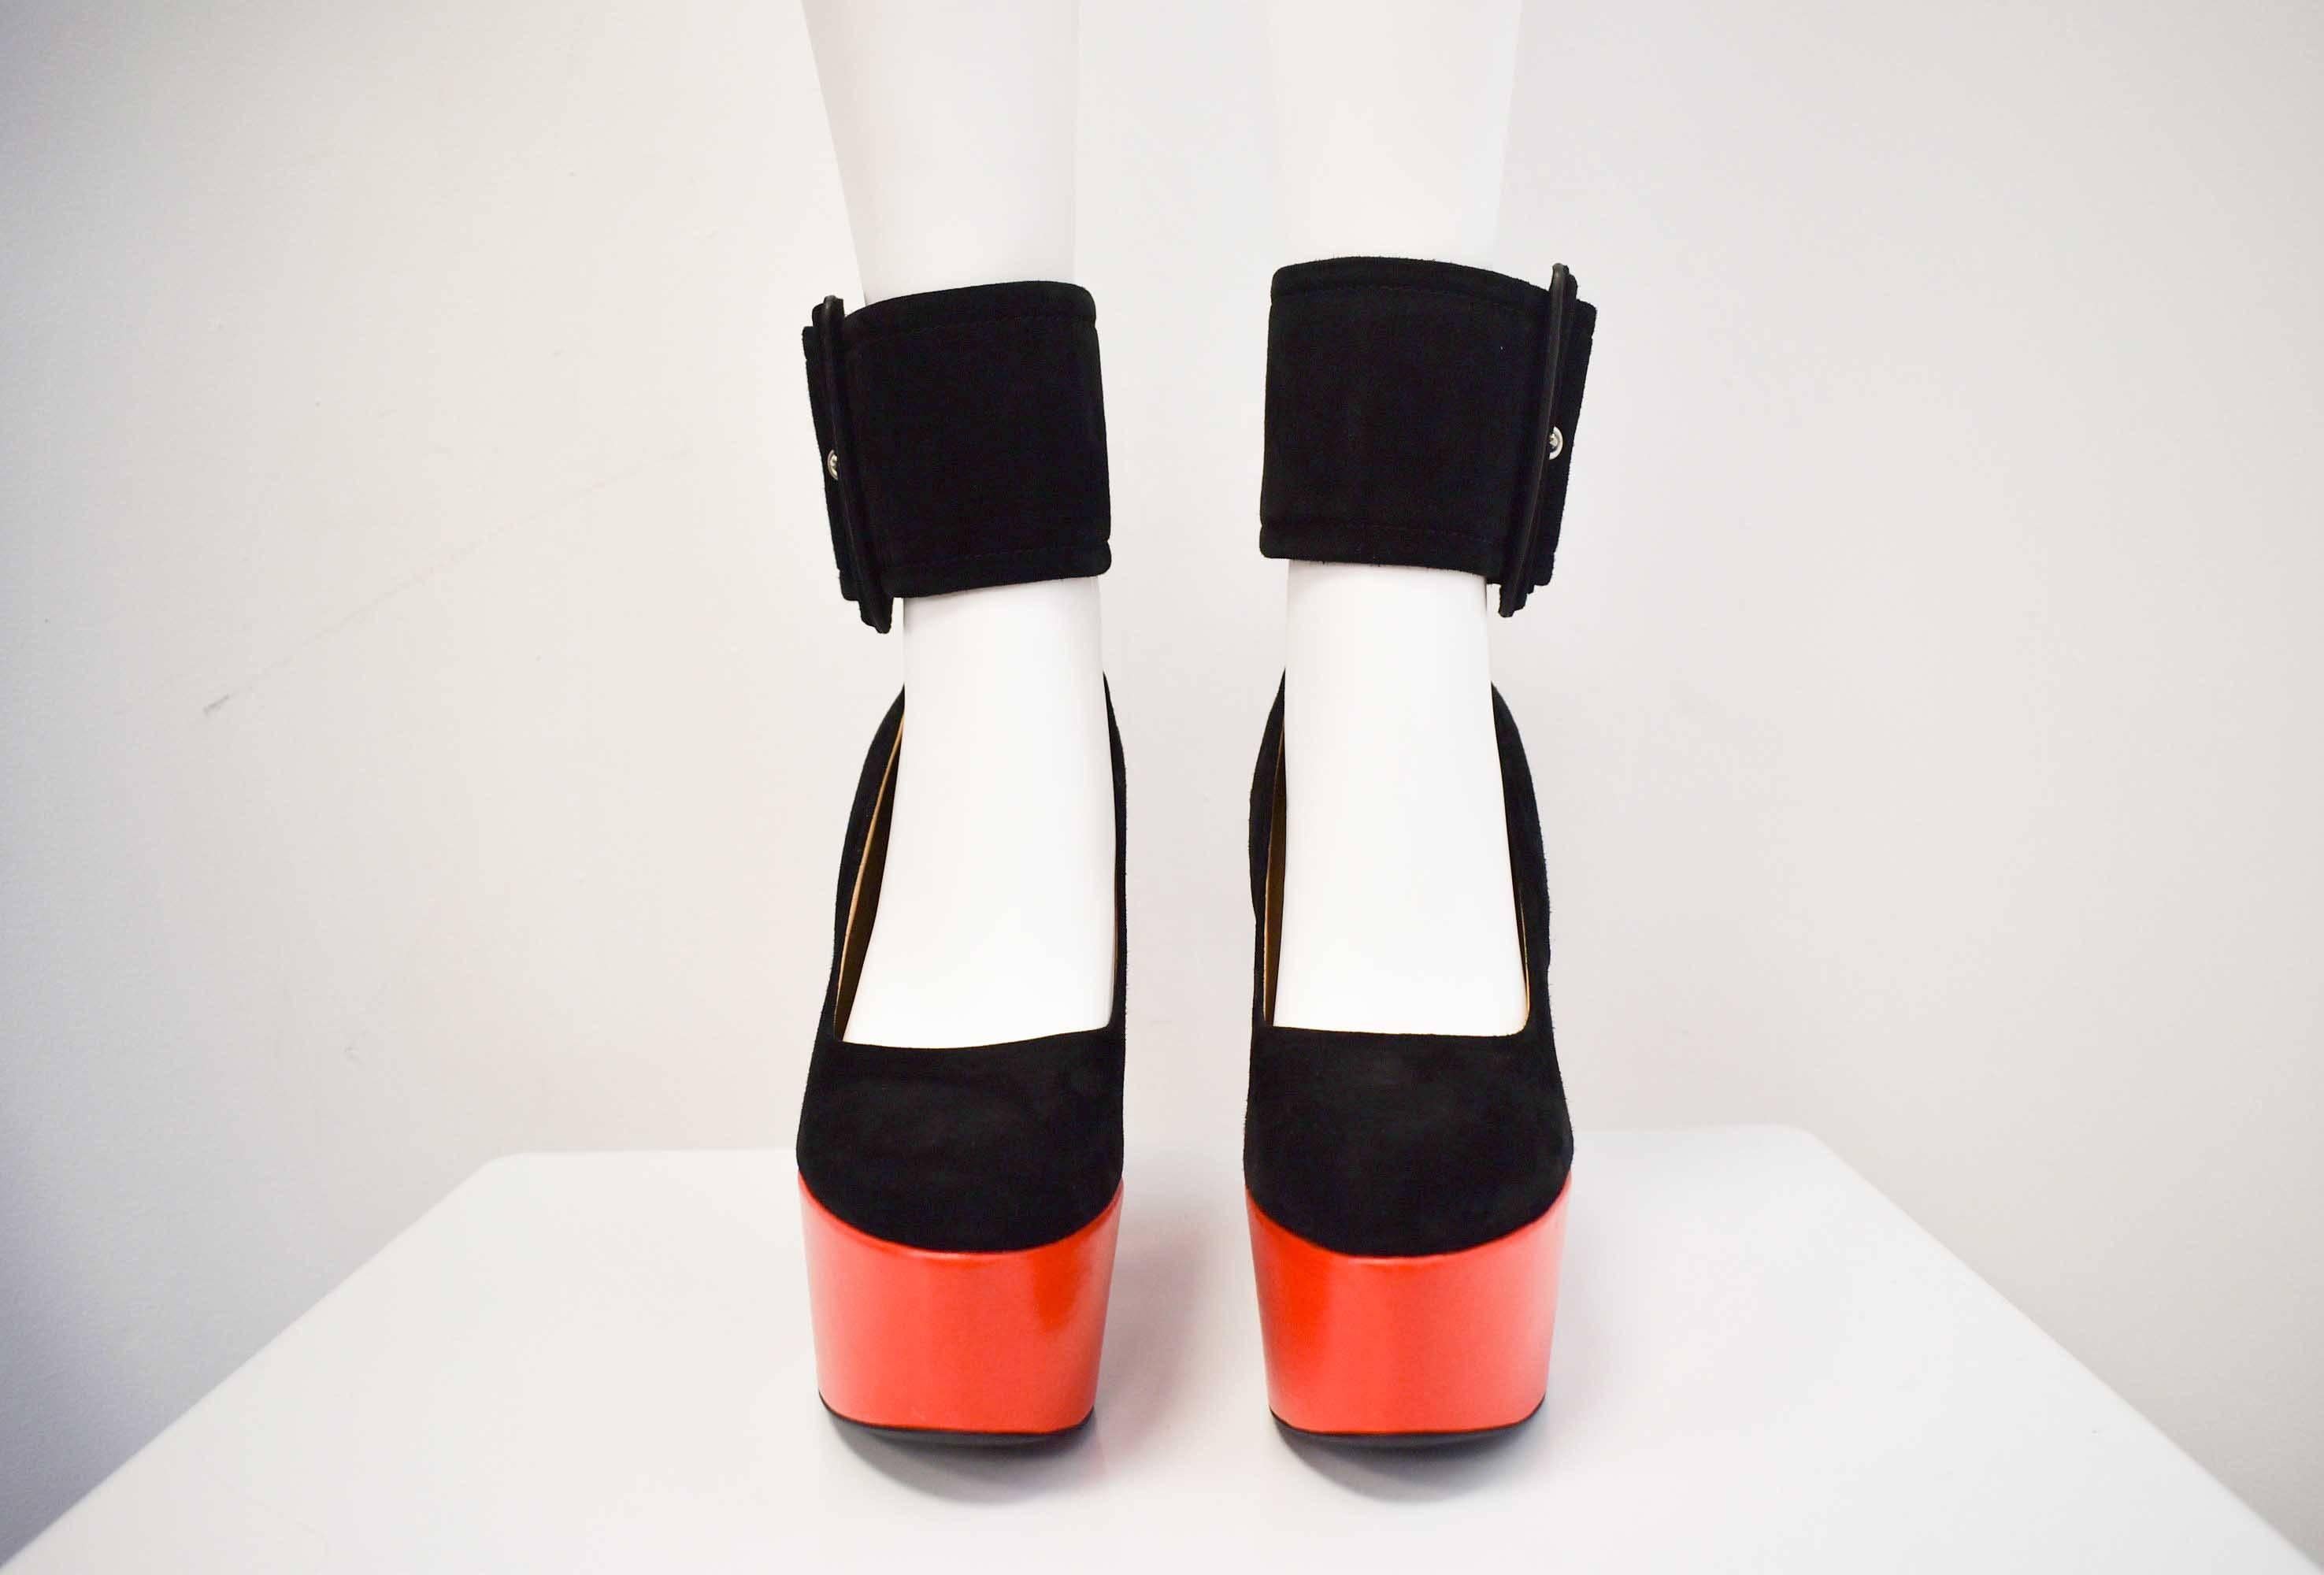 These Gorgeous Celine shoes are from Celine’s Spring Summer 2012 collection. The shoes are made from a soft black suede and the platform is made from a bright red leather. 
The shoes also feature an oversized ankle strap that resembles a cinch